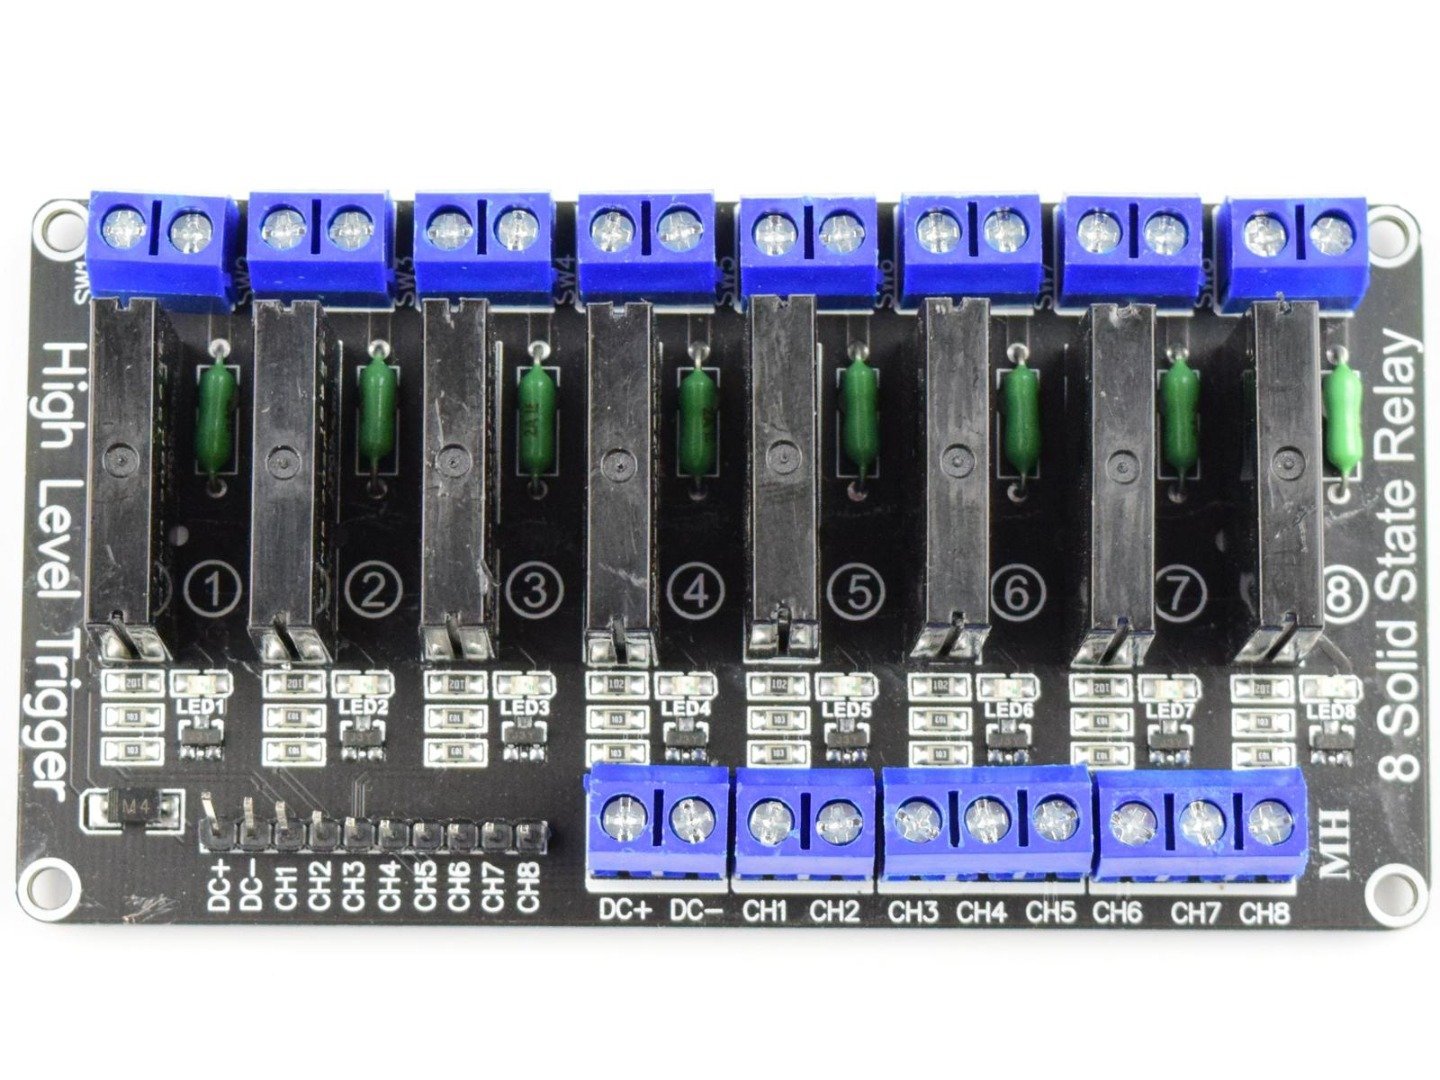 8 Channel SSR Solid State Relay Module 250V 2A – for 3.3V and 5V control voltage 8